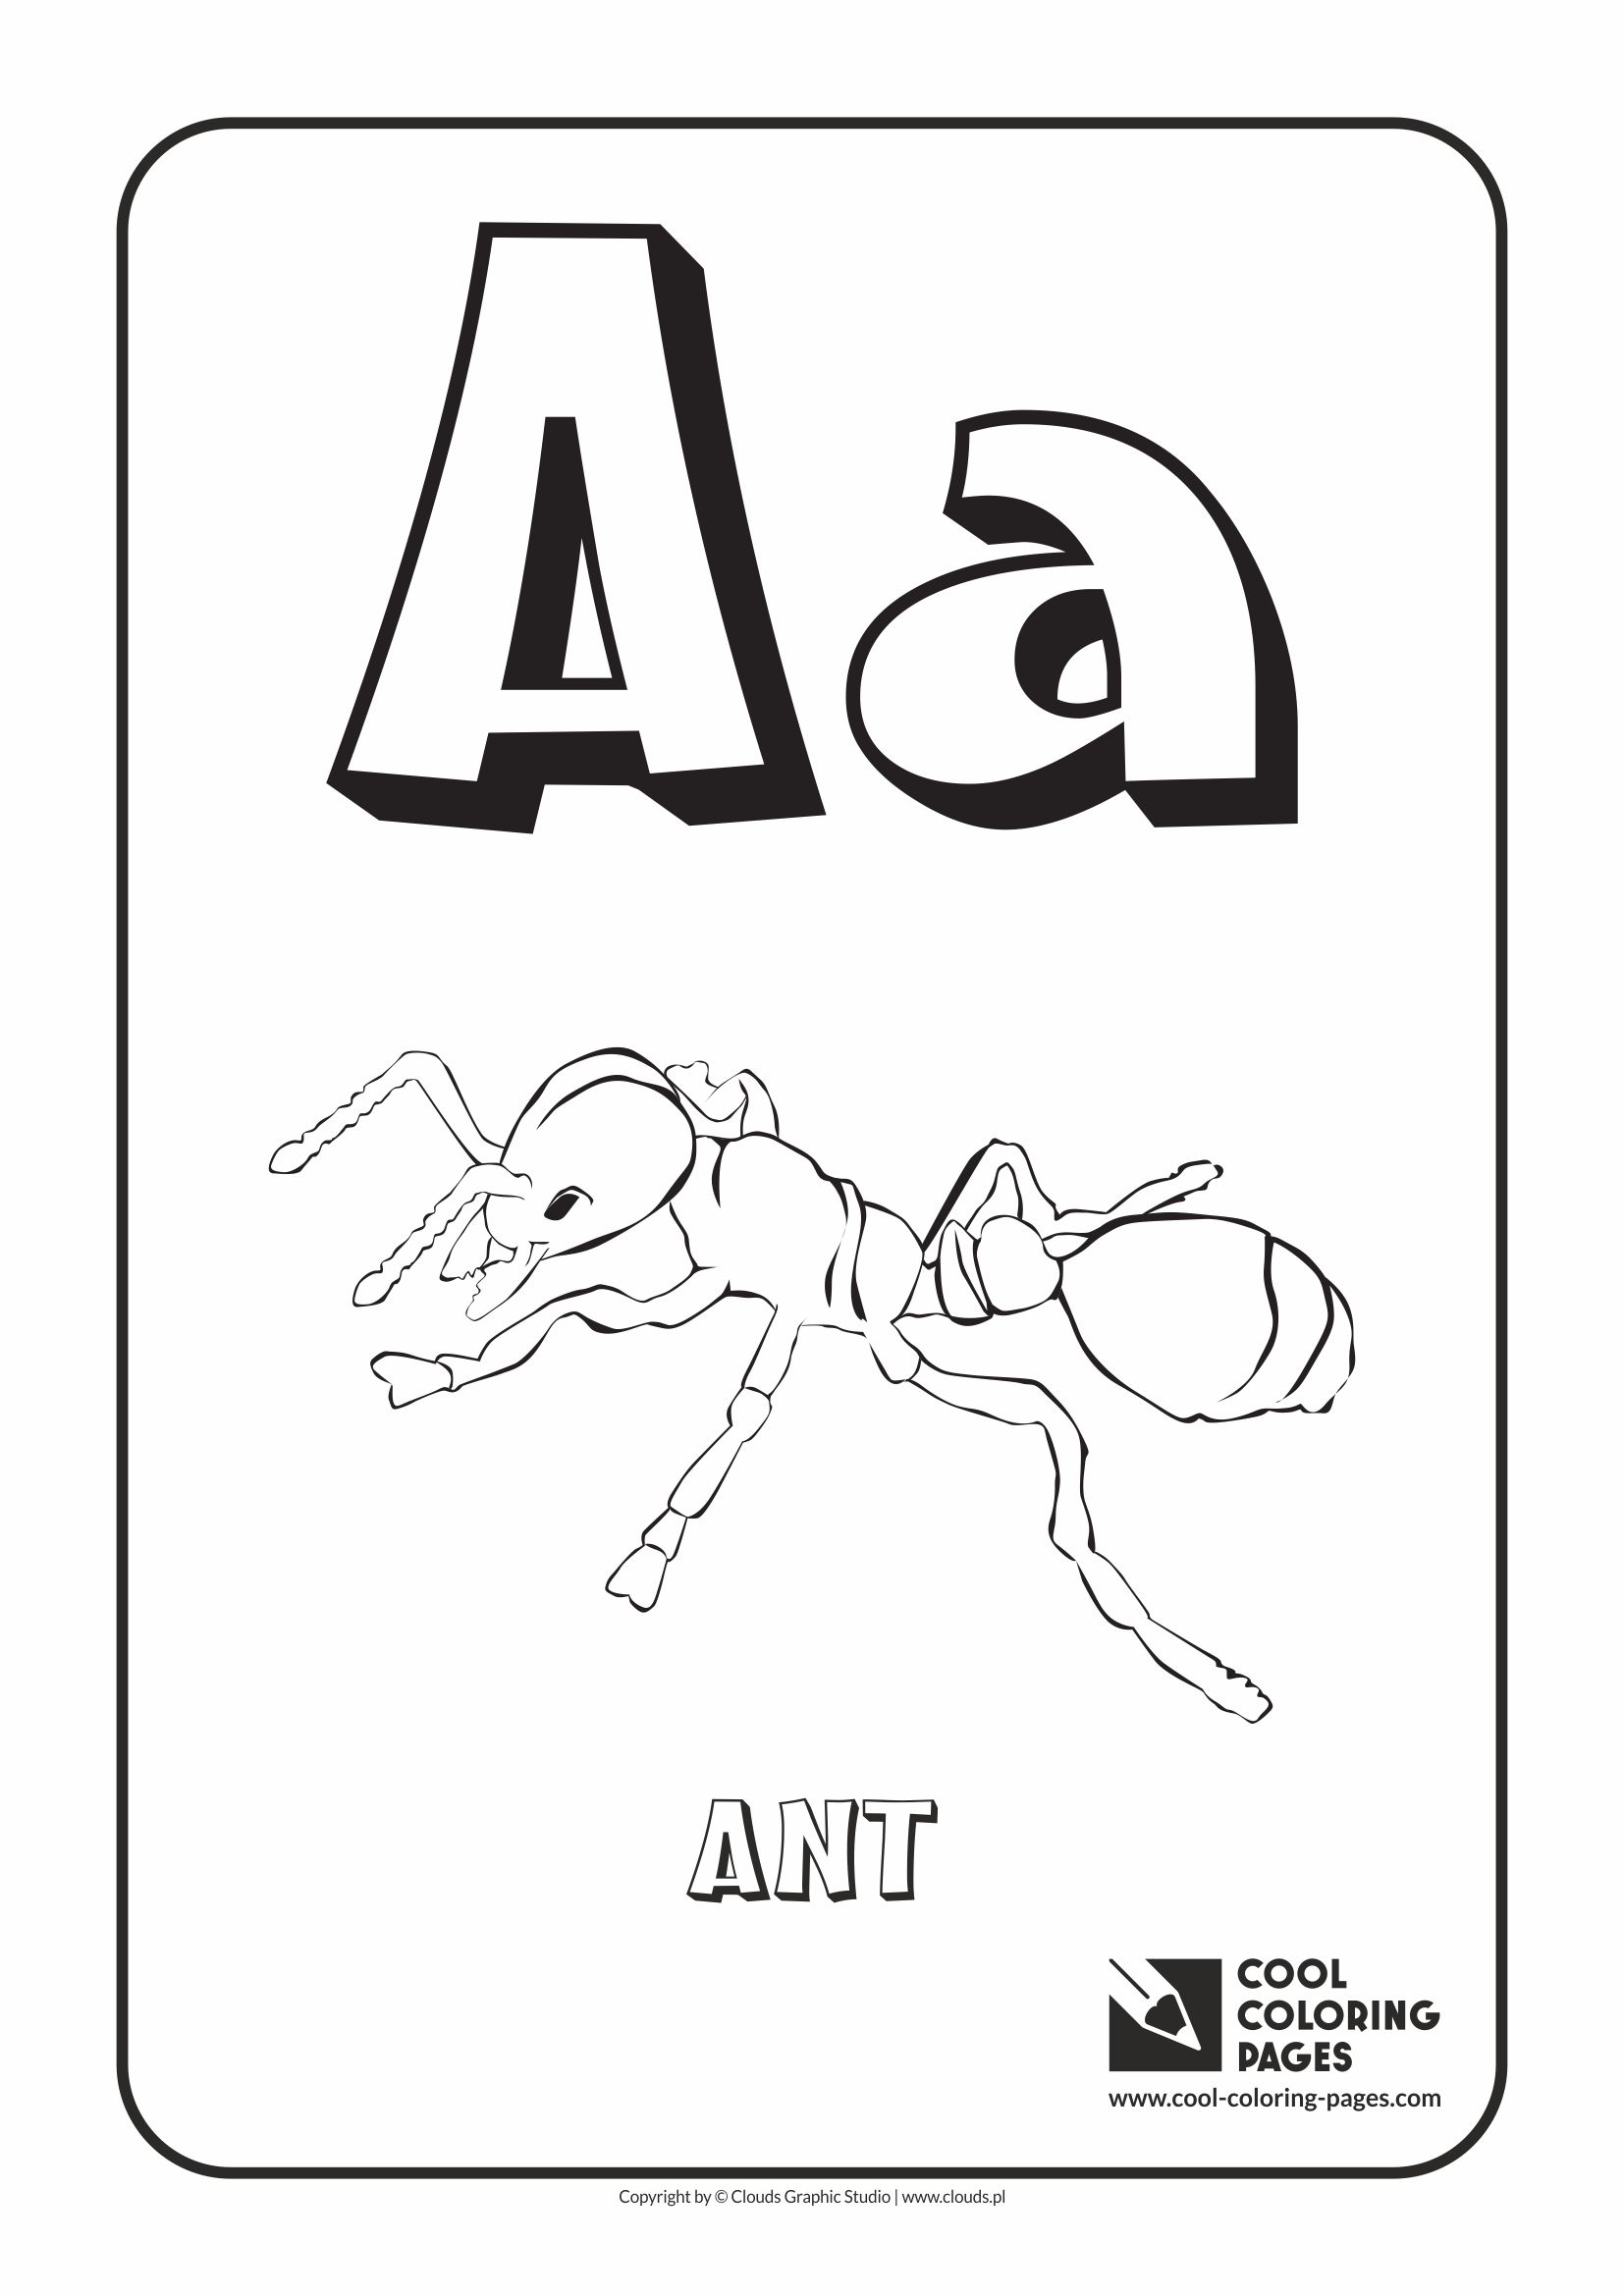 Cool coloring pages letter a